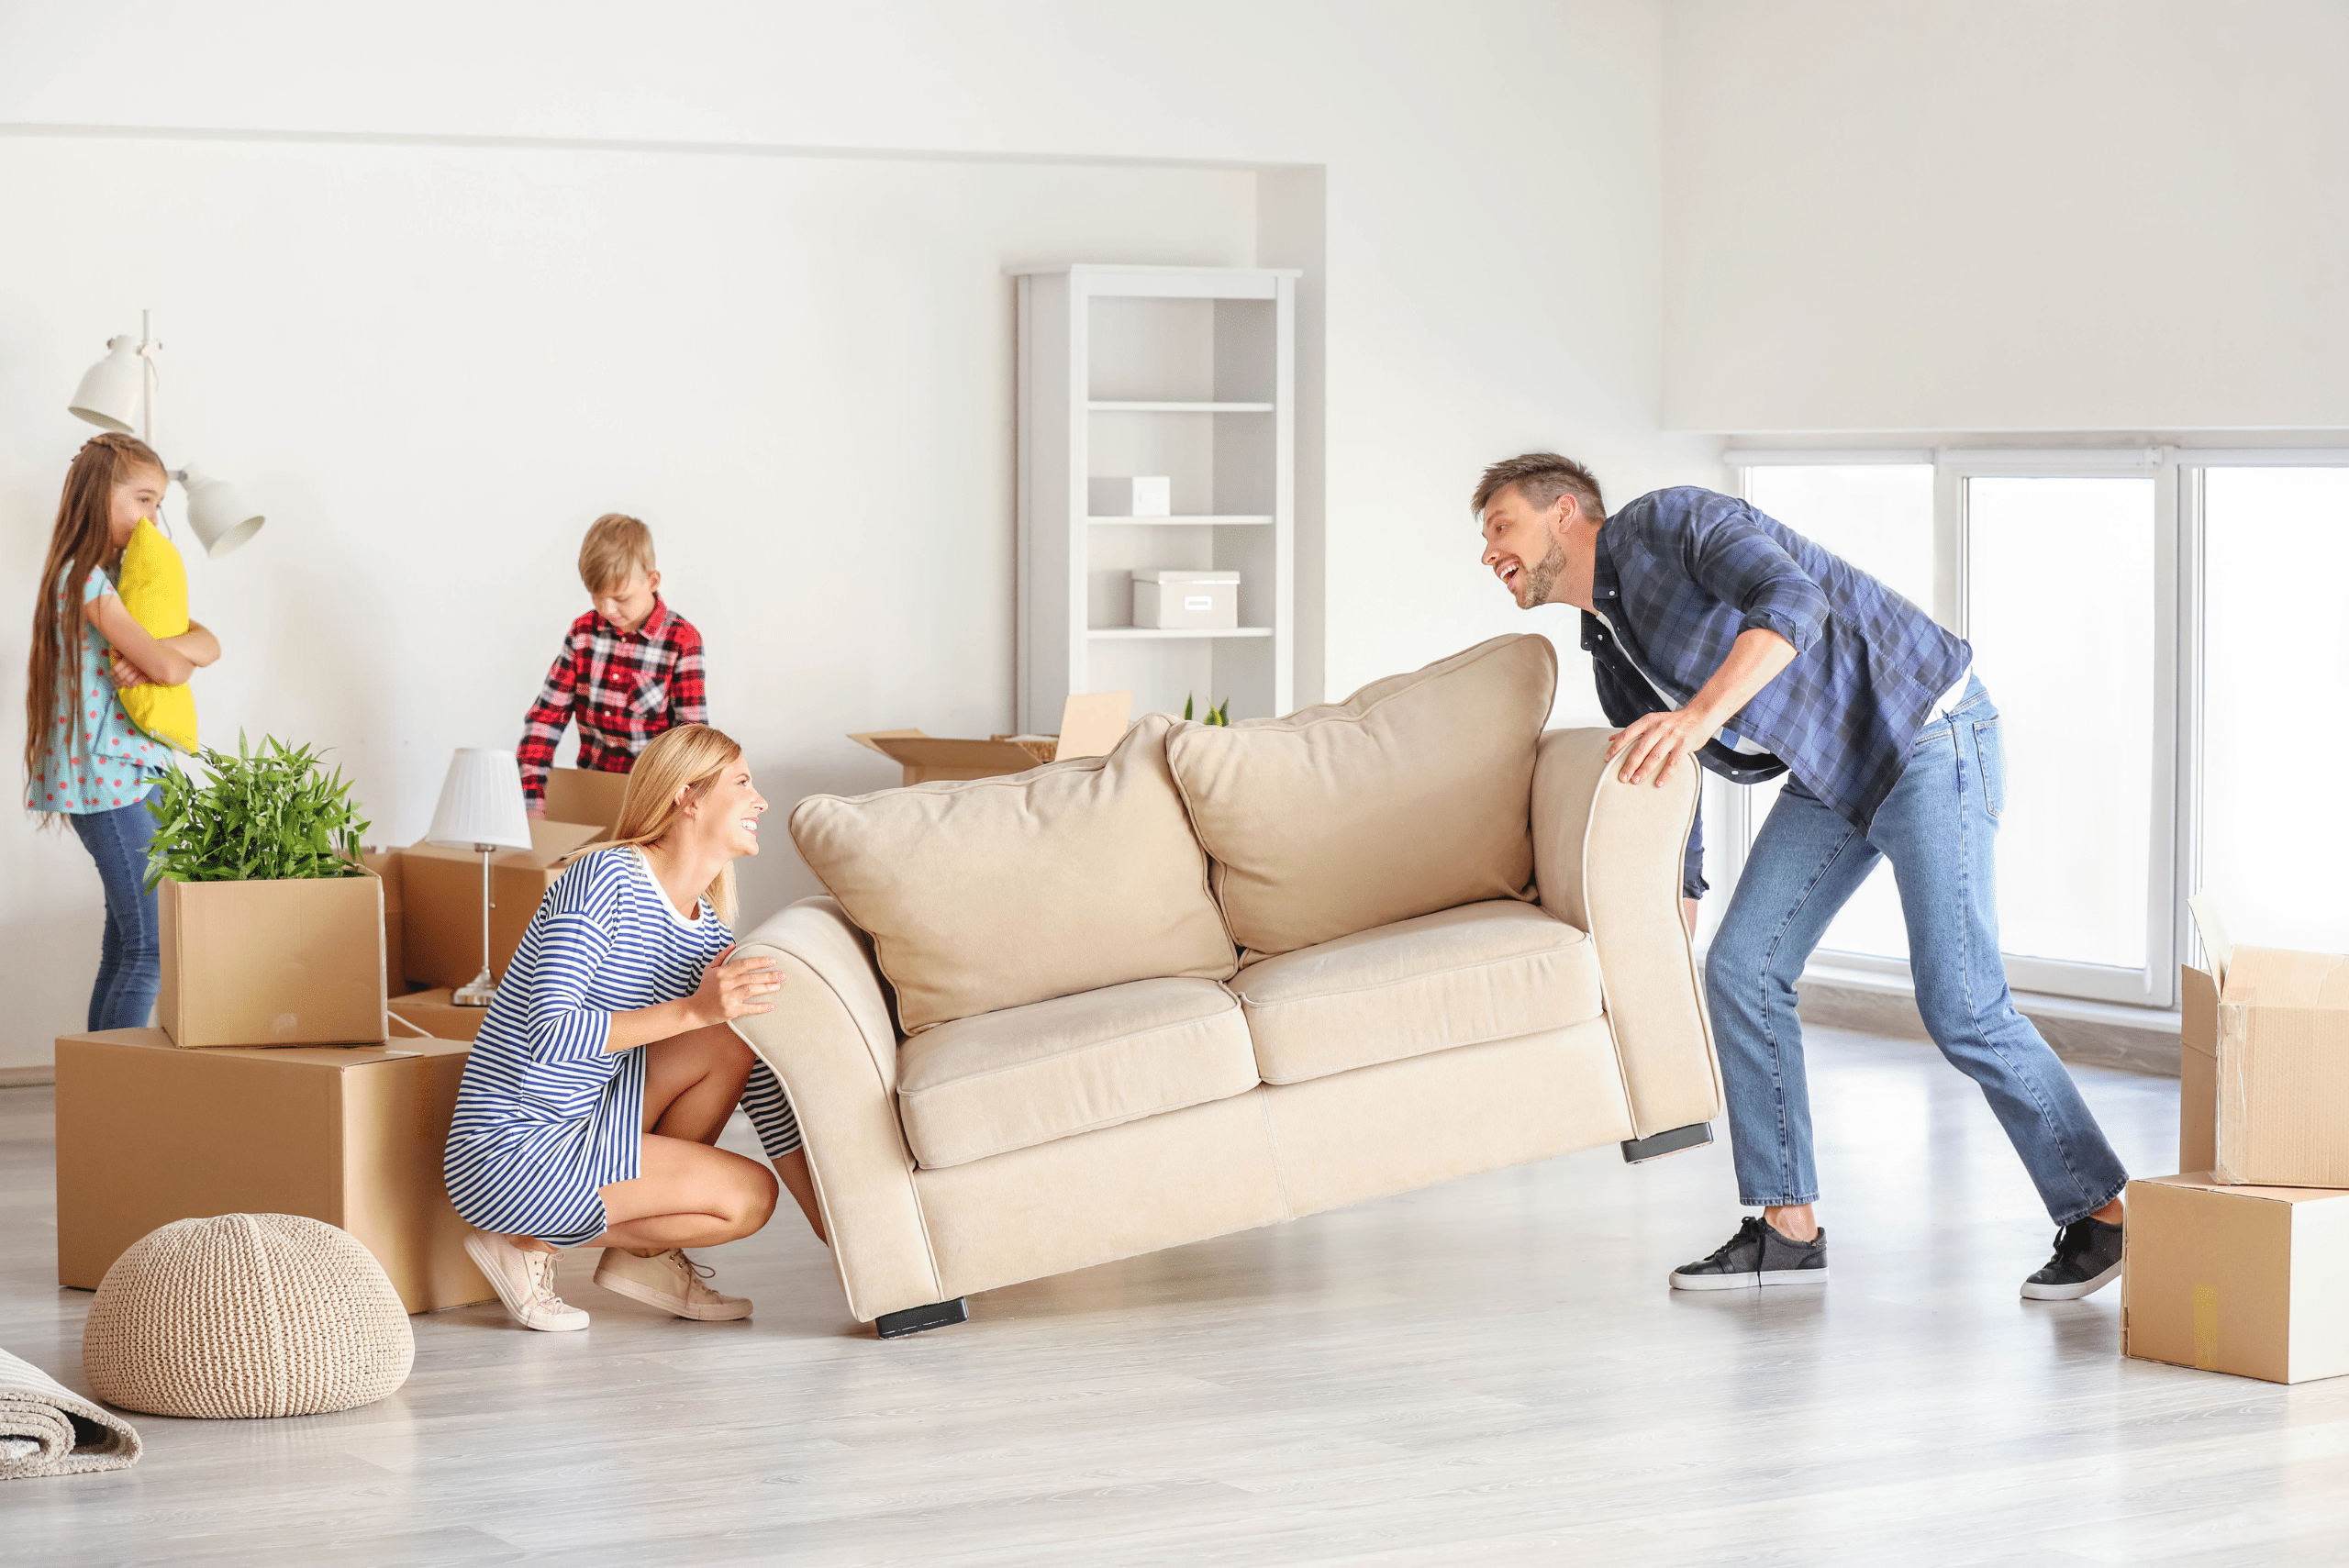 Couple lifting a couch with their kids in the background.